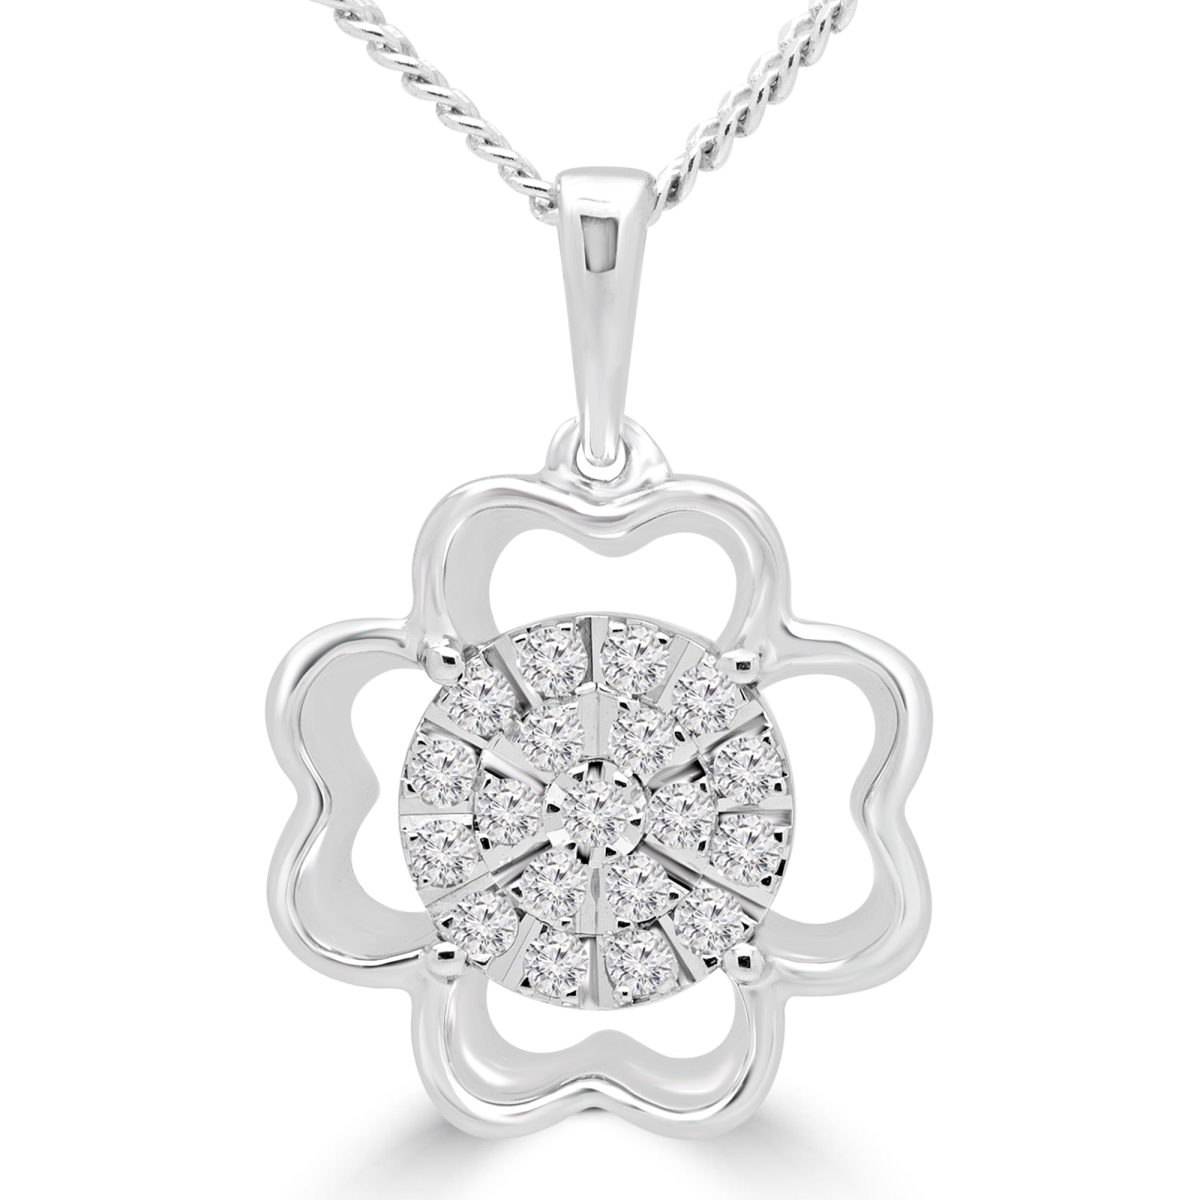 Mdr180023 0.14 Ctw Round Diamond Floral Motif Cluster Pendant Necklace In 10k White Gold With Chain